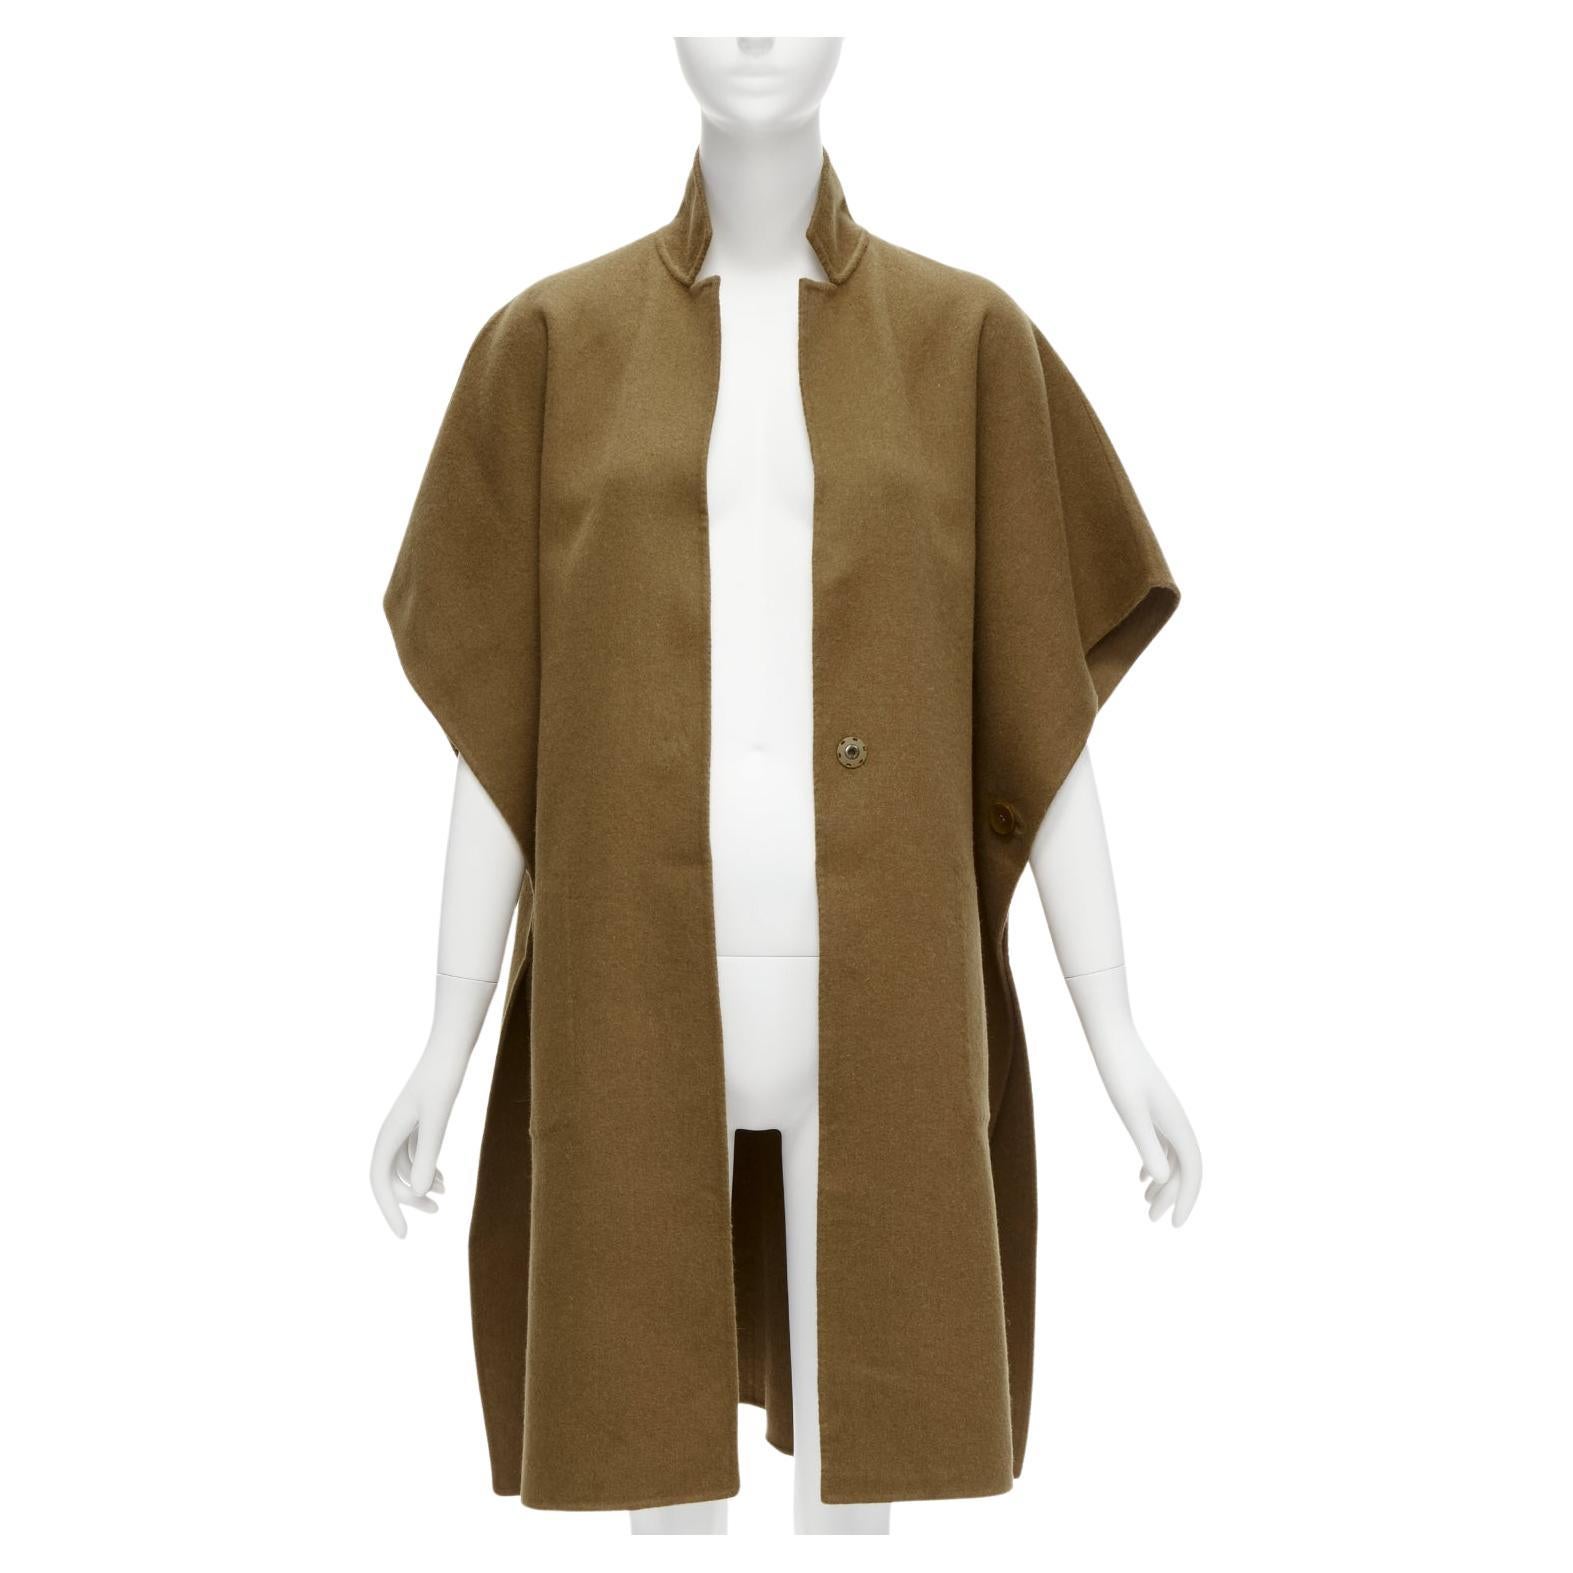 TIBI brown virgin wool angora cape sleeve high collar coat US0 XS
Reference: SNKO/A00268
Brand: Tibi
Material: Virgin Wool, Angora
Color: Brown
Pattern: Solid
Closure: Snap Buttons
Extra Details: Single snap button closure. Side buttons at